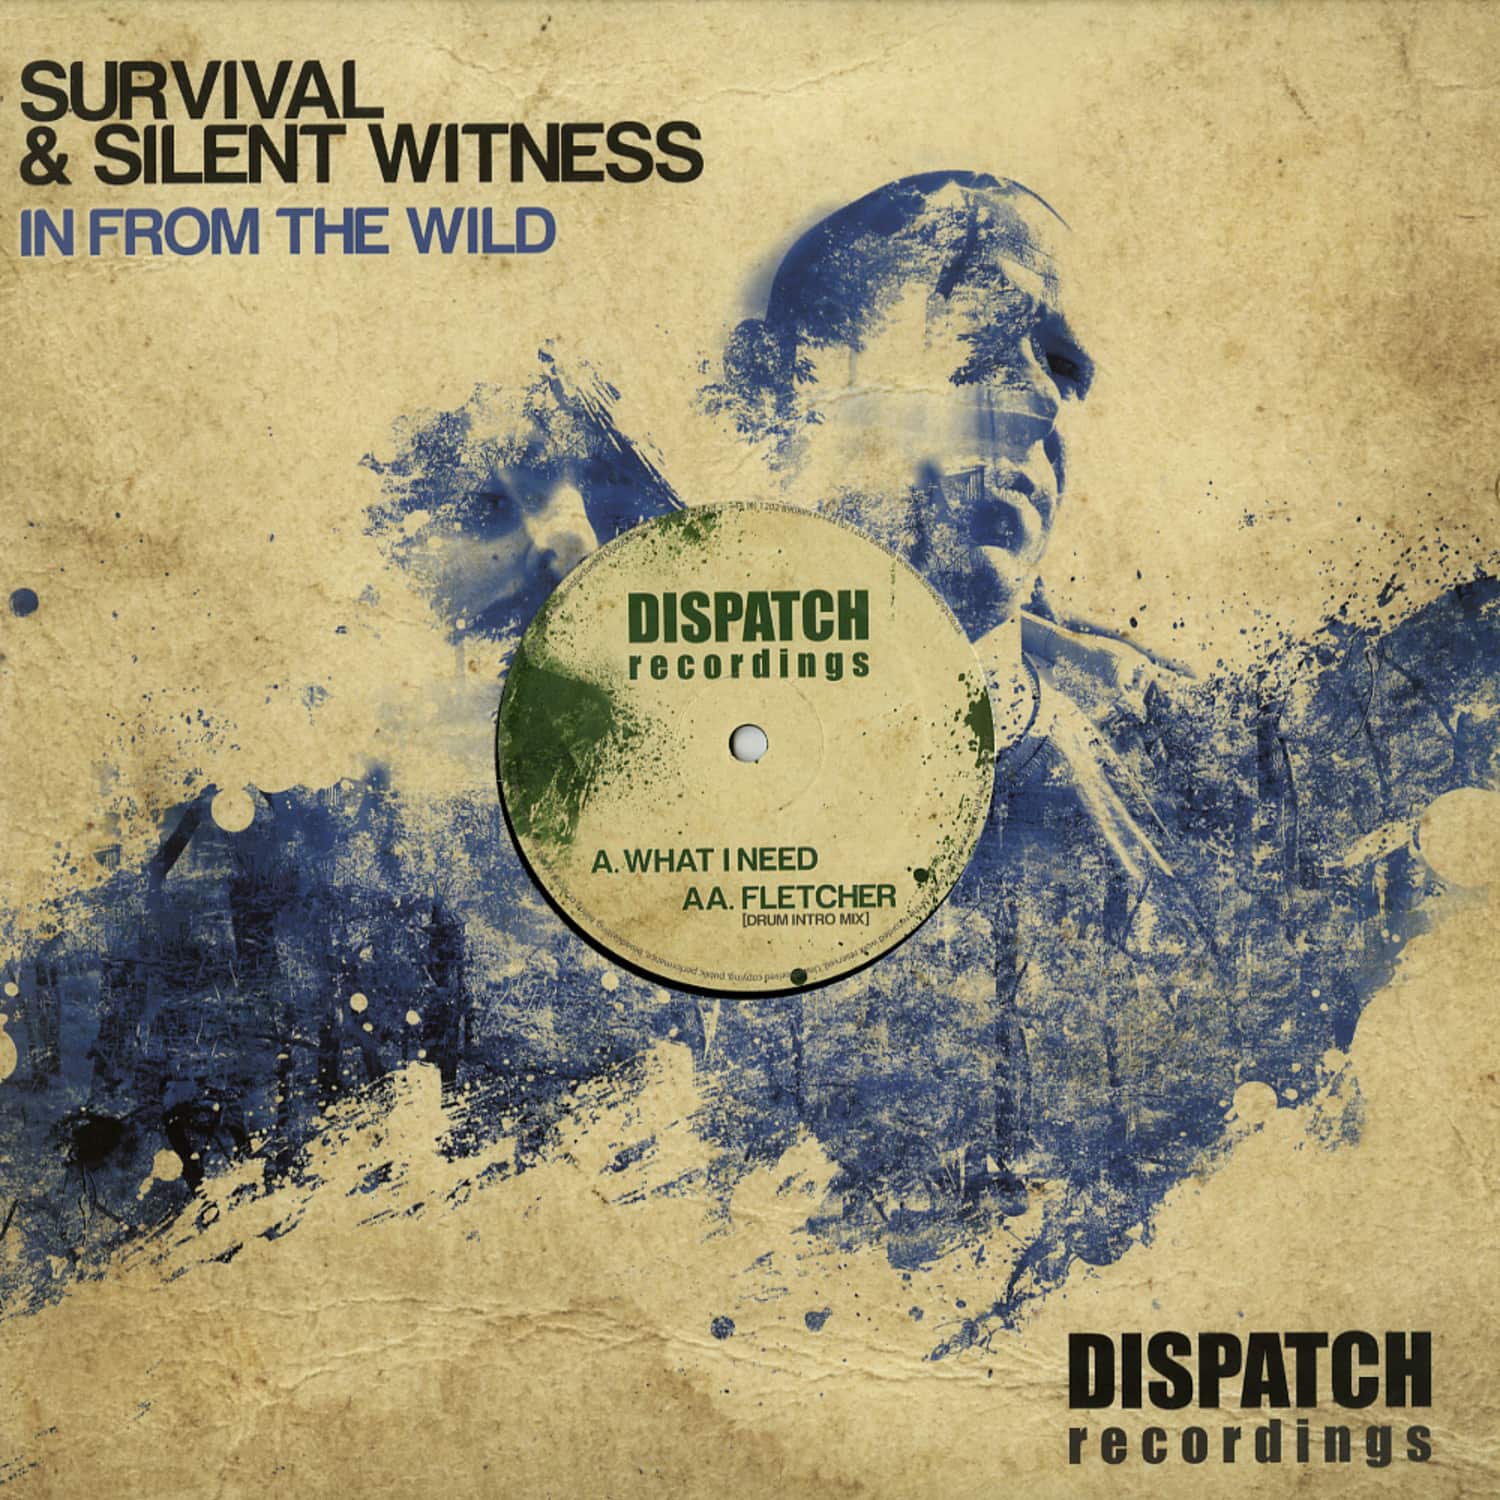 Survival & Silent Witness - WHAT I NEED / FLETCHER